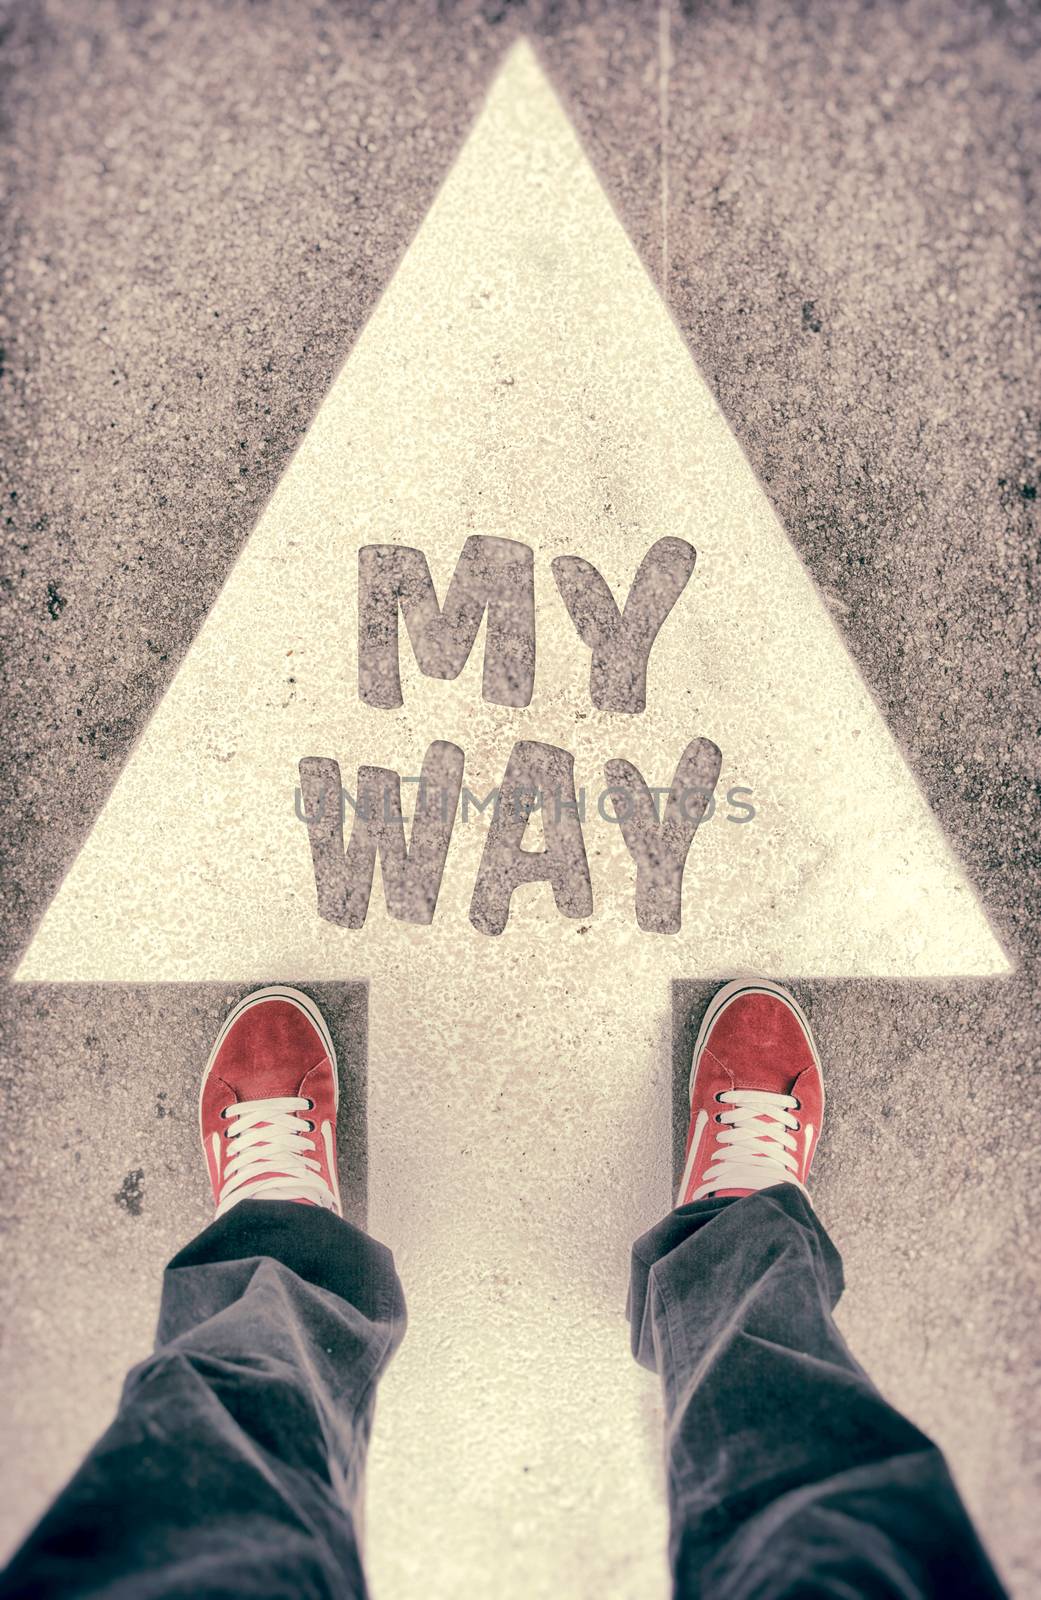 My way concept by badmanproduction